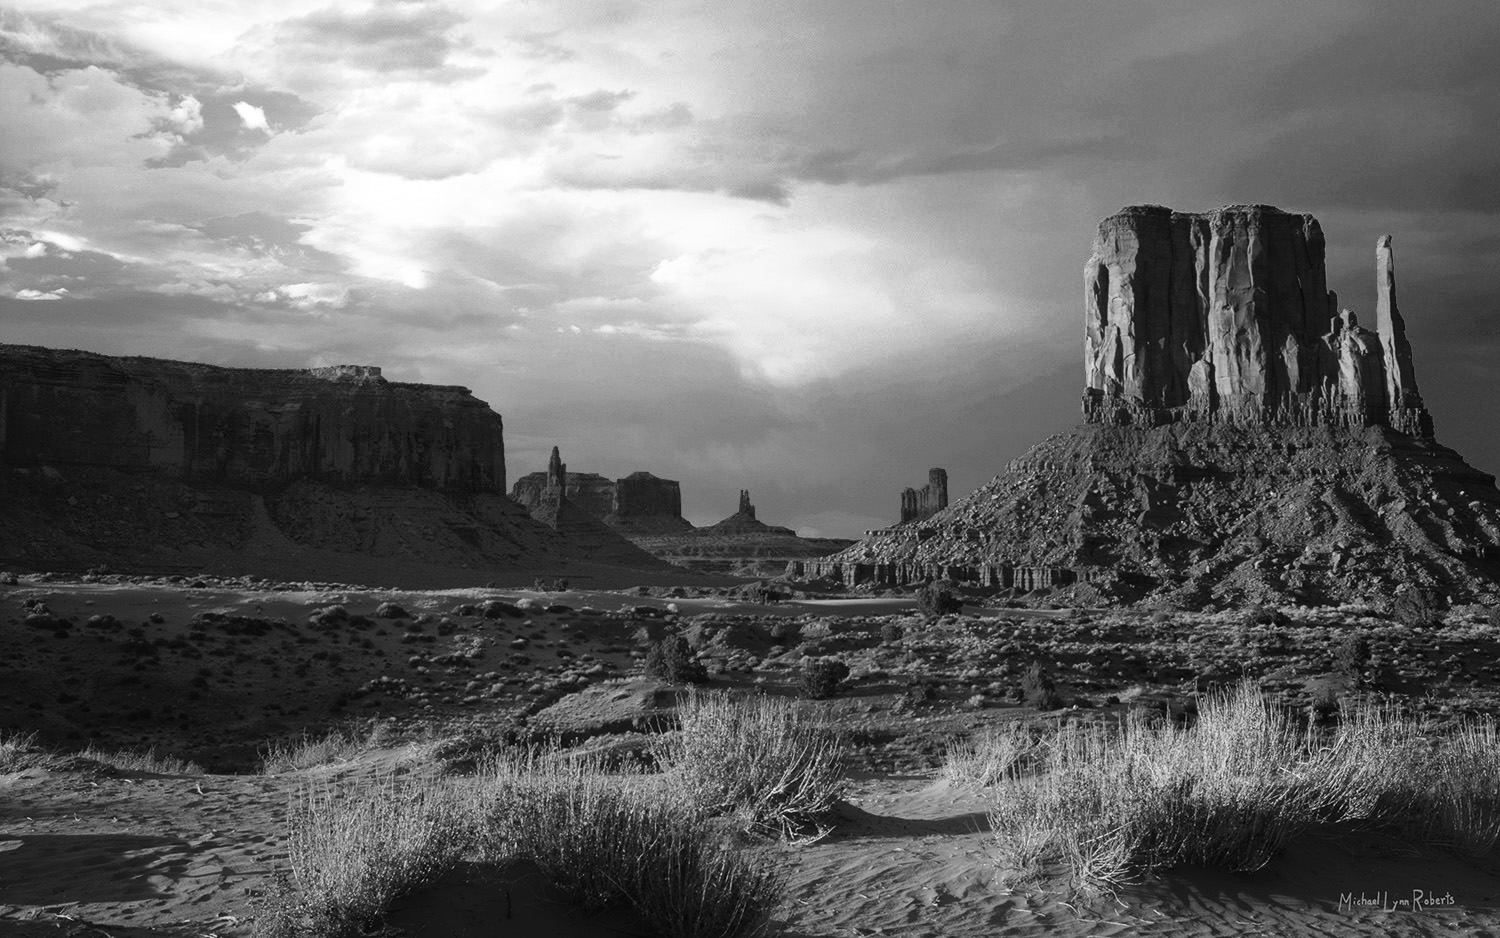 This may be my all-time favorite photograph of Monument Valley. It is certainly my most treasured experience there. In late May...